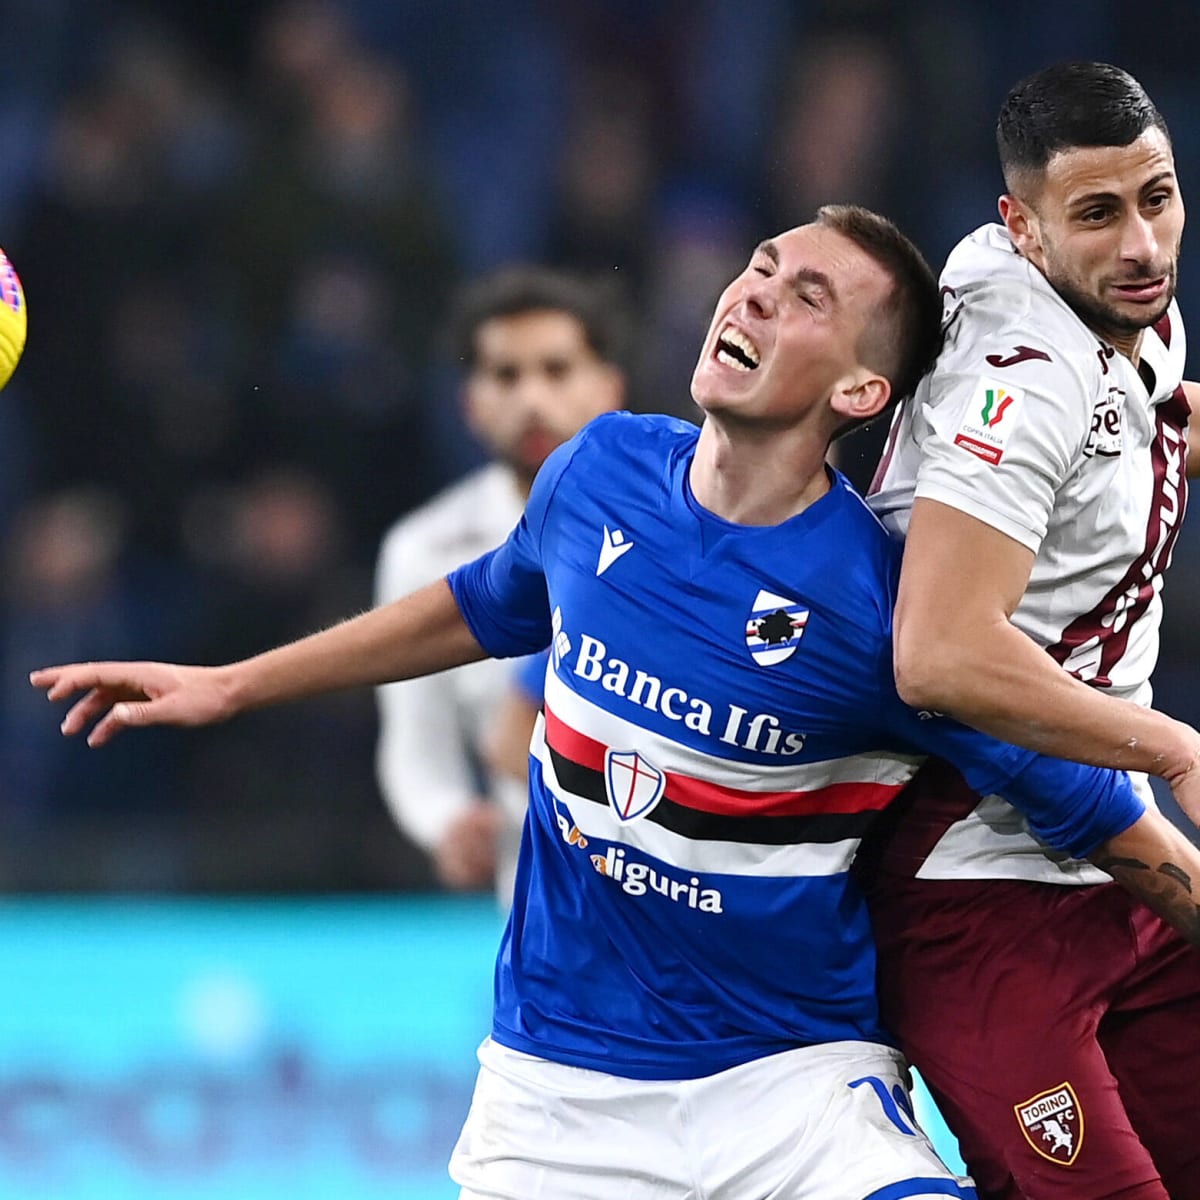 Watch AC Milan vs Sampdoria Stream Serie A live in Canada - How to Watch and Stream Major League and College Sports